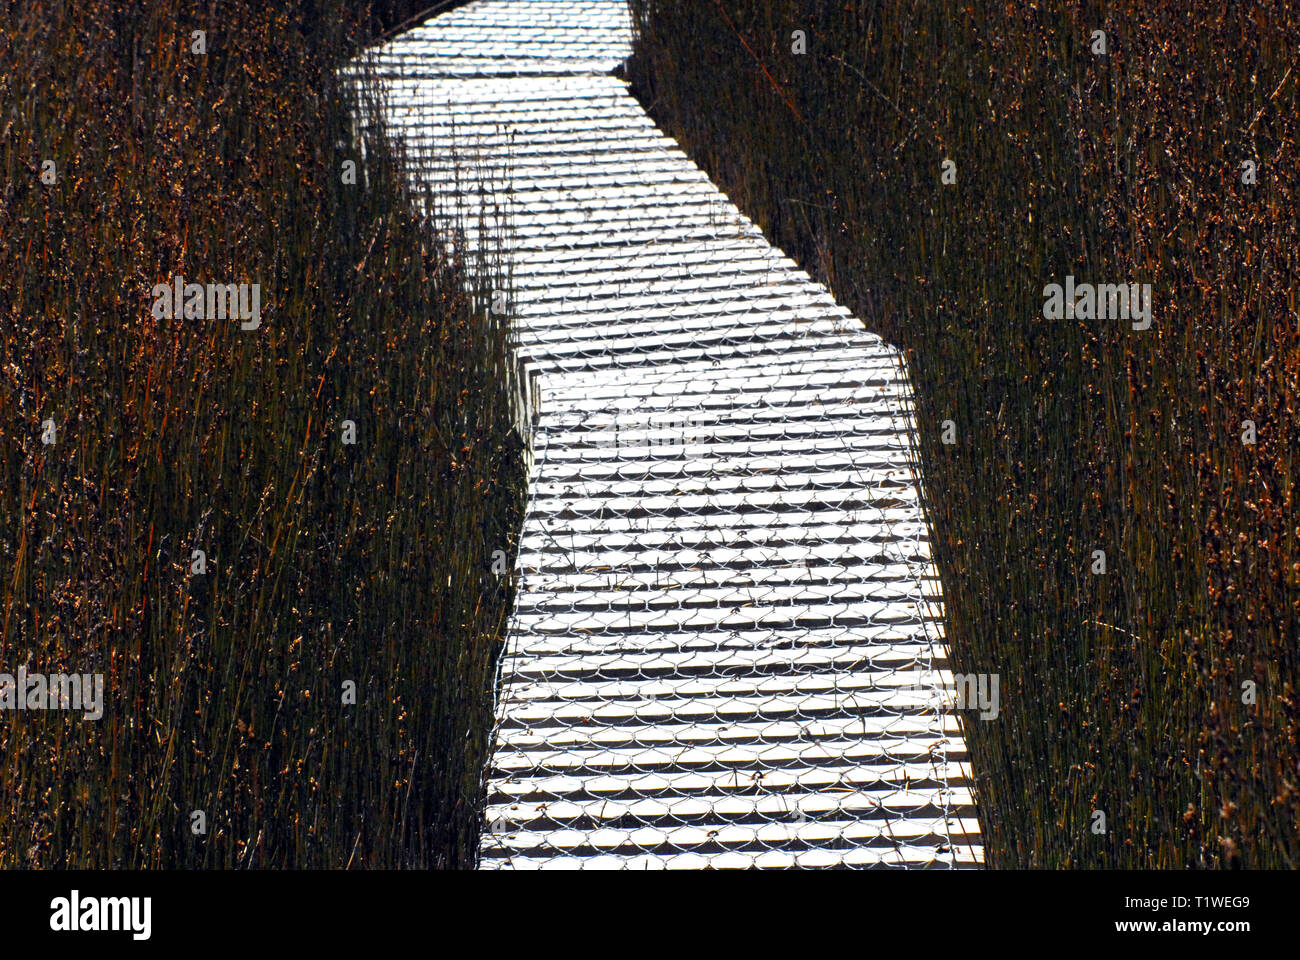 A walkway through a marsh in New Zealand creates an amazing abstract textured  background with a contrasting shiny silver path through the middle. Stock Photo